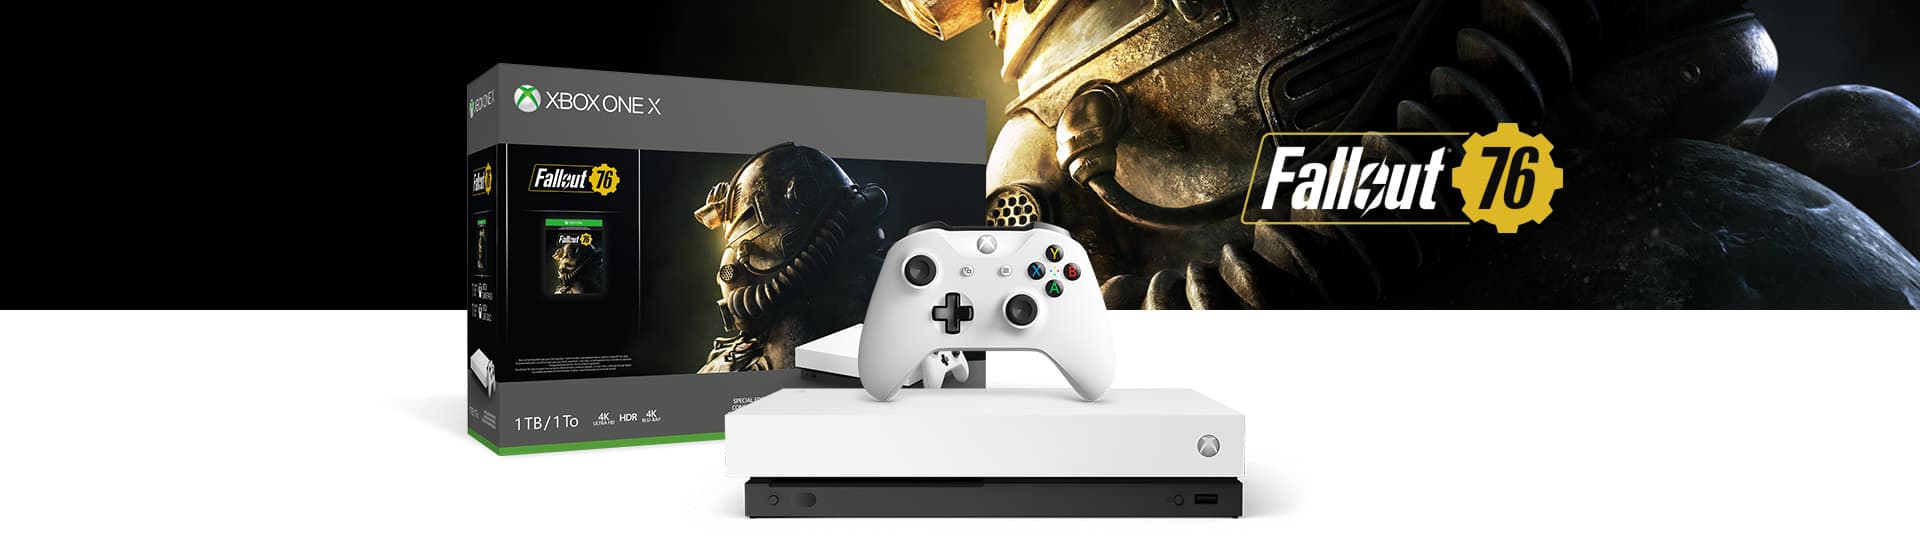 Save $50 on select Xbox One bundles on the Microsoft Store - OnMSFT.com